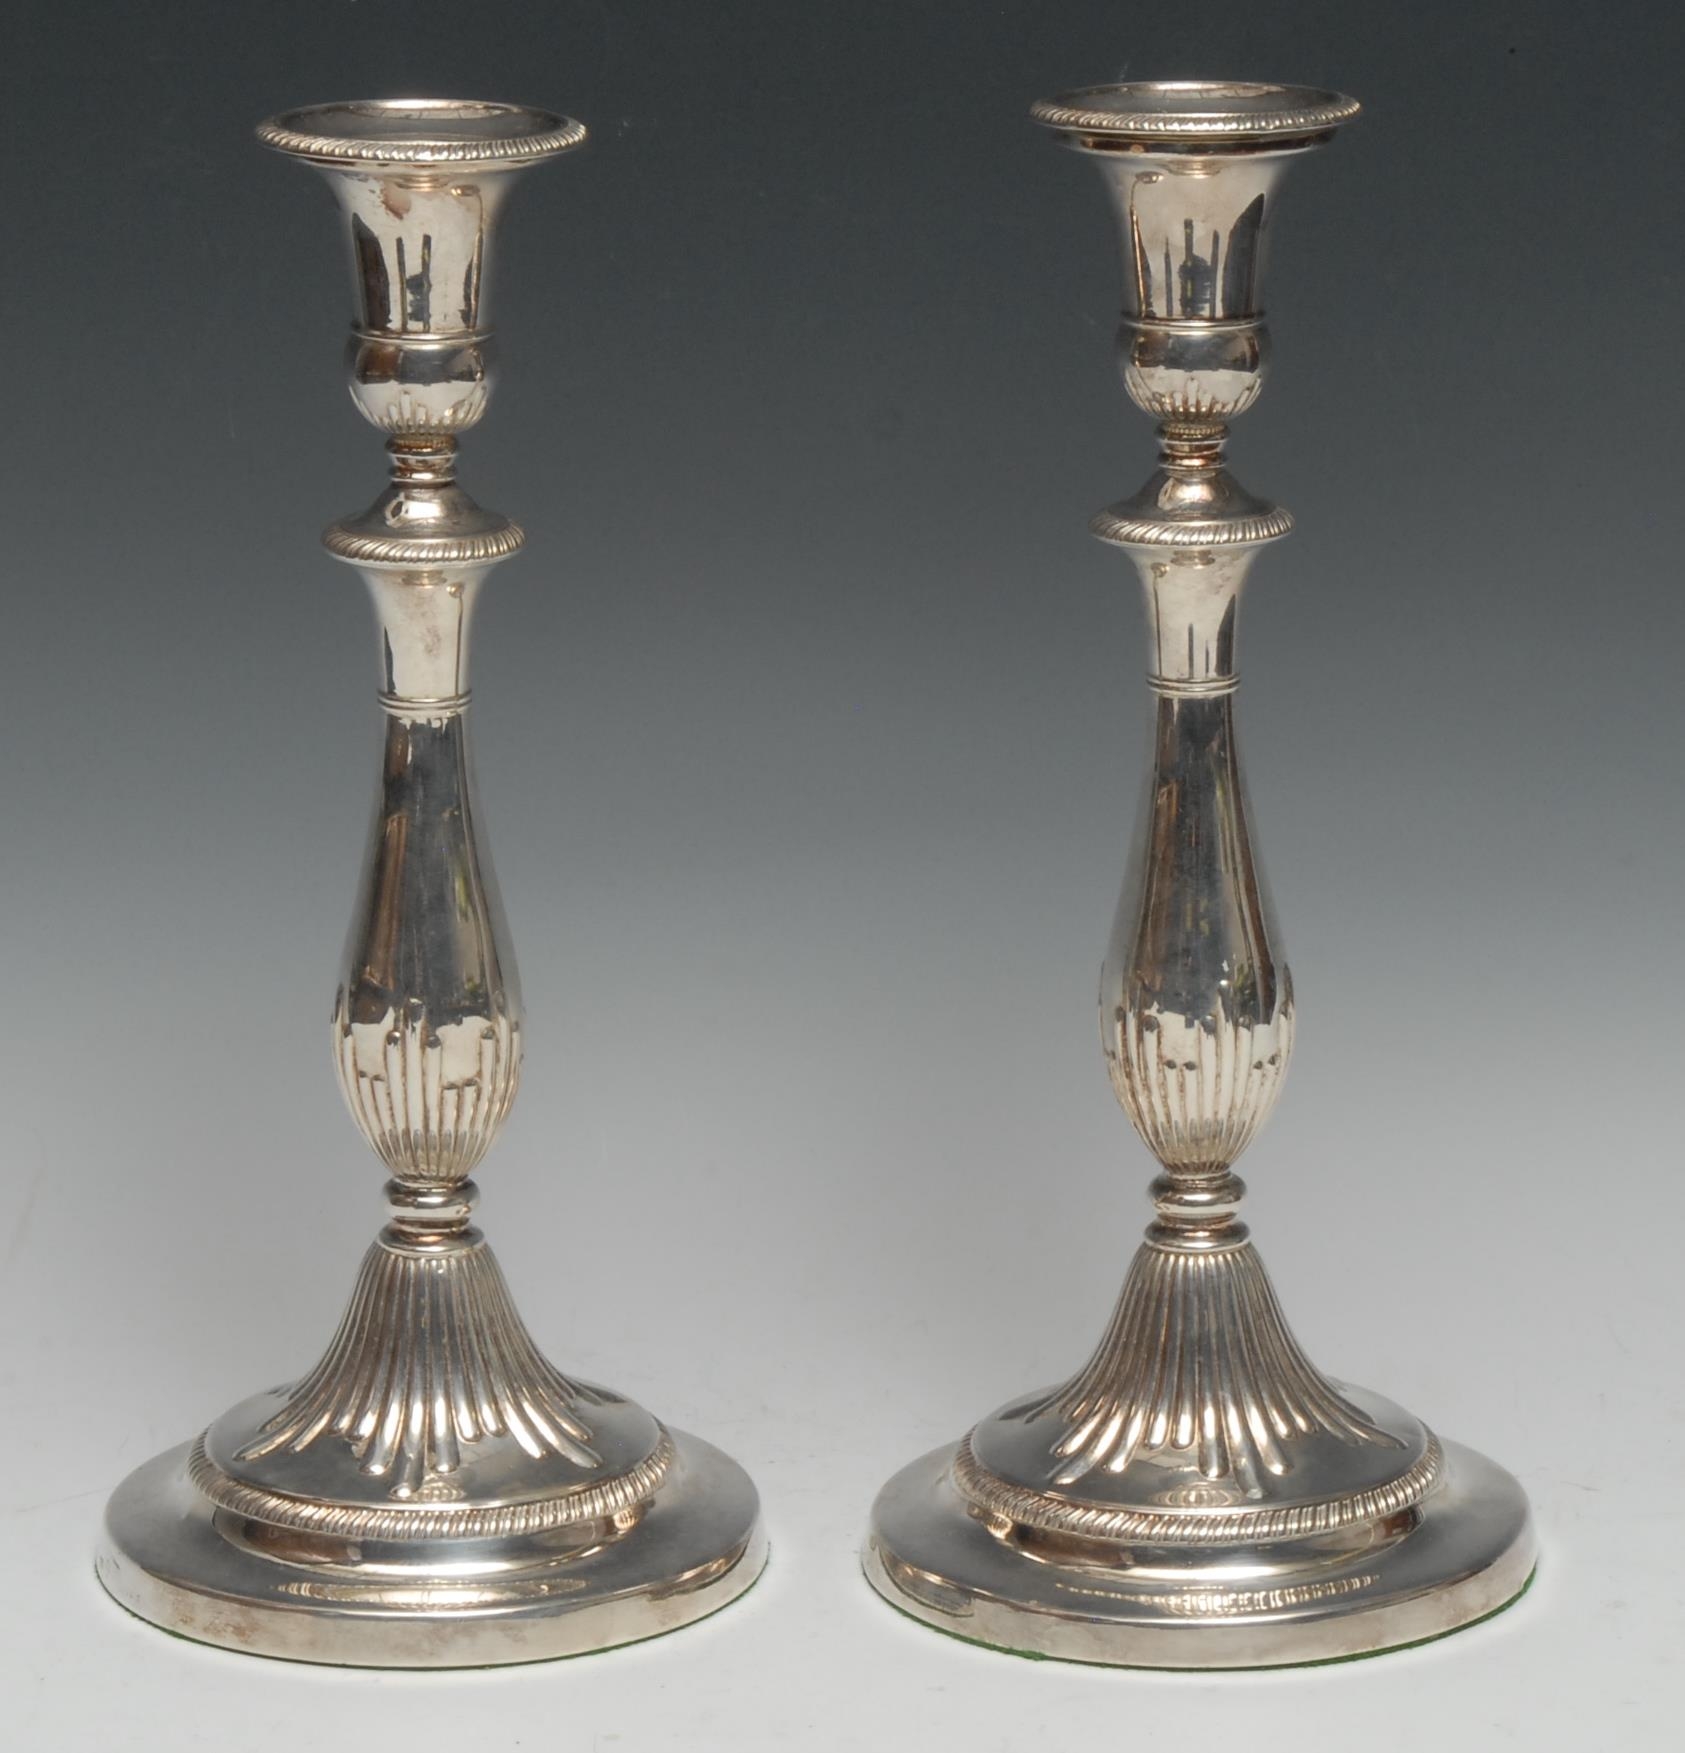 Matthew Boulton - a pair of George III silver table candlesticks, campana sconces with detachable